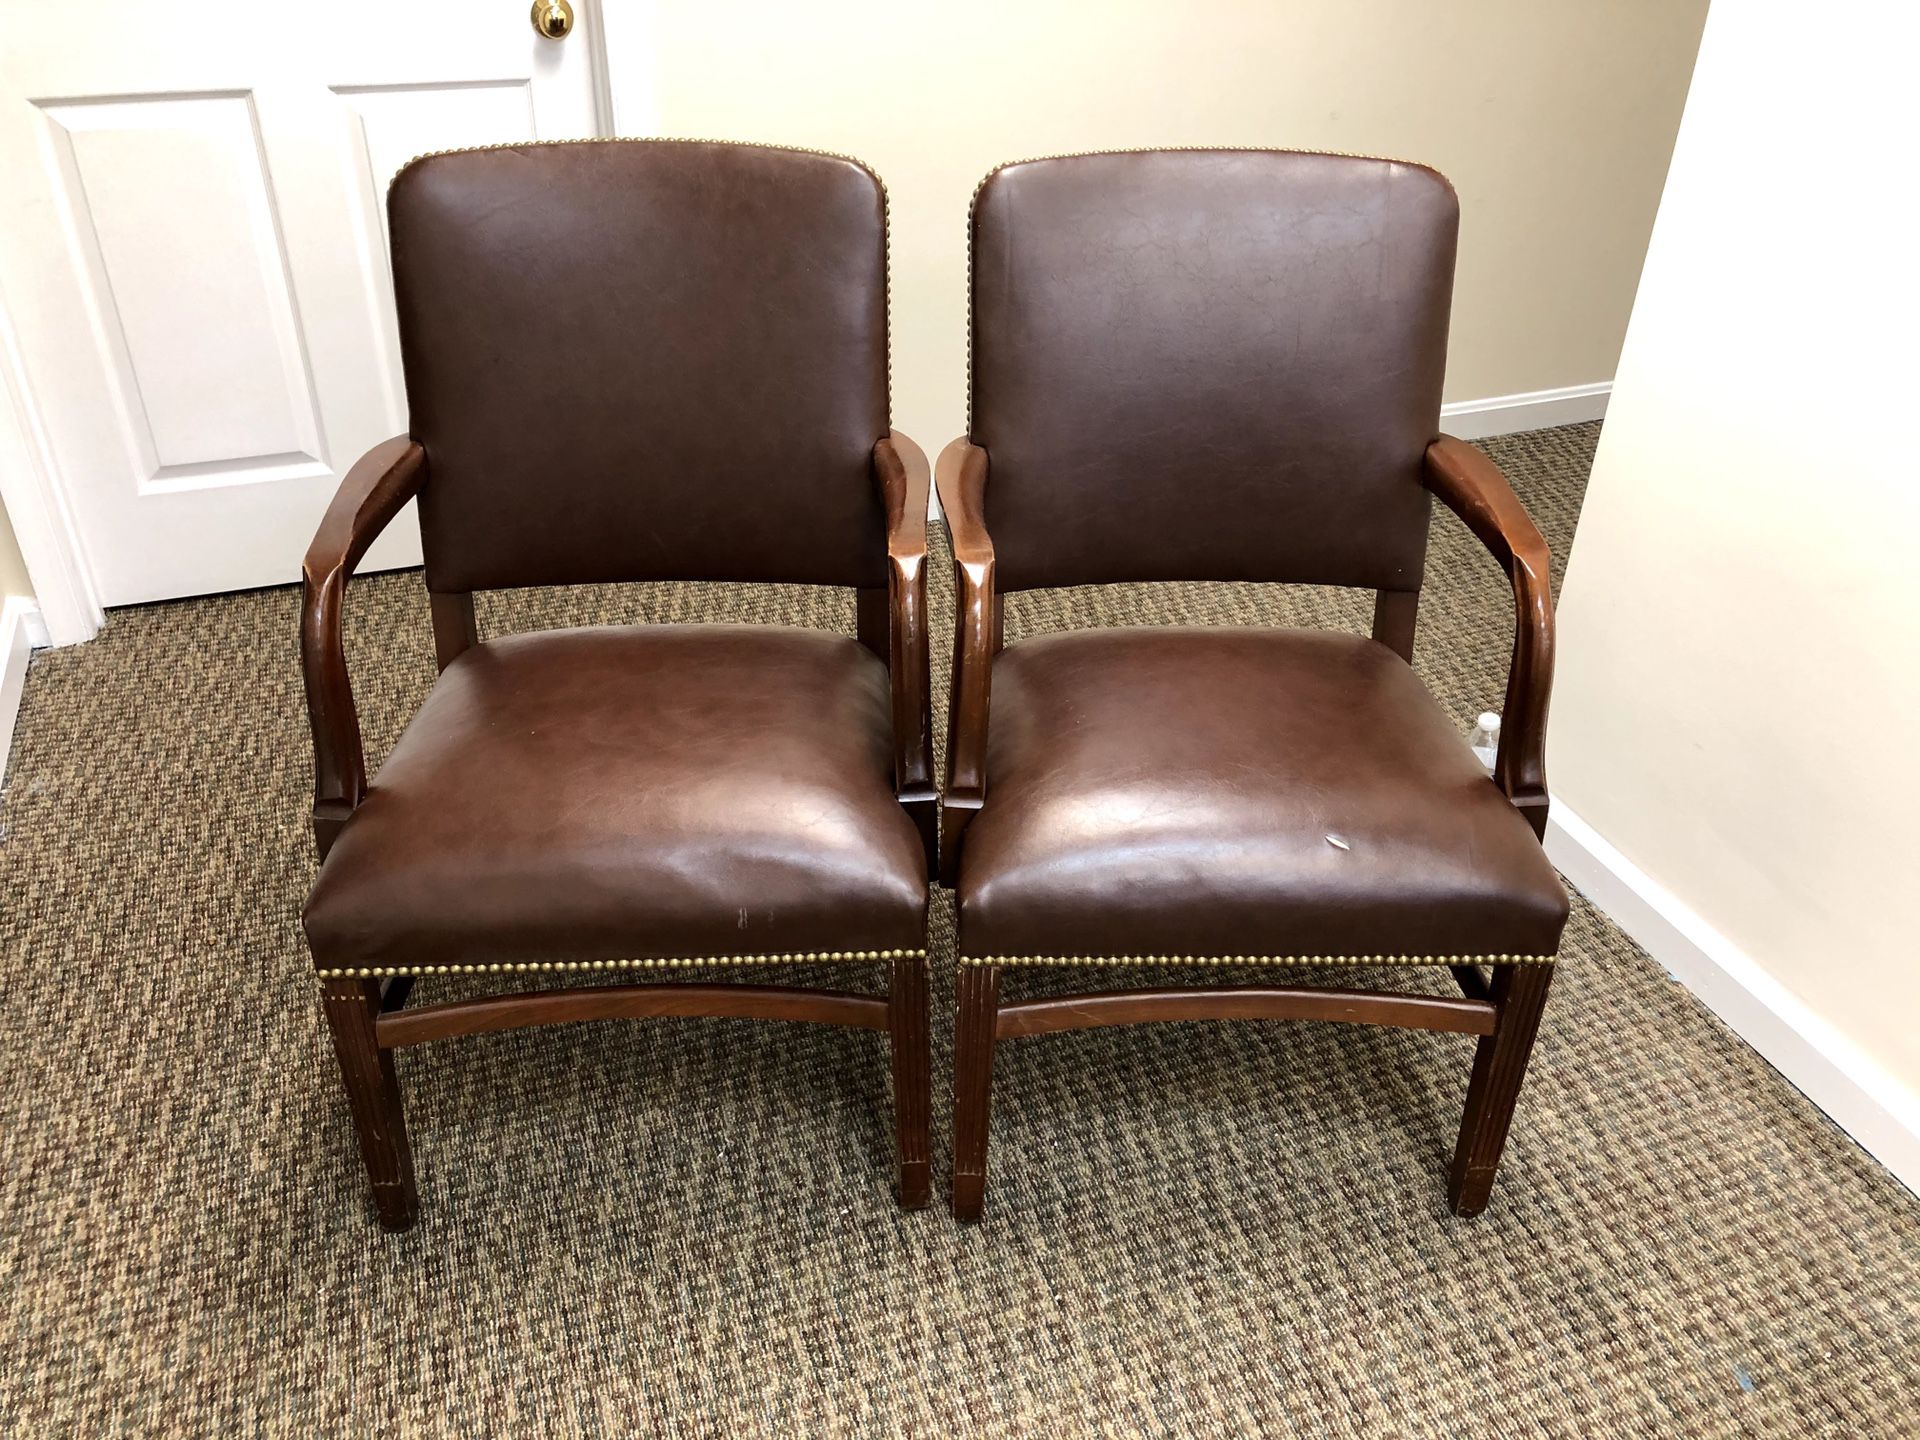 A Pair Of Office / Waiting Room Chairs.